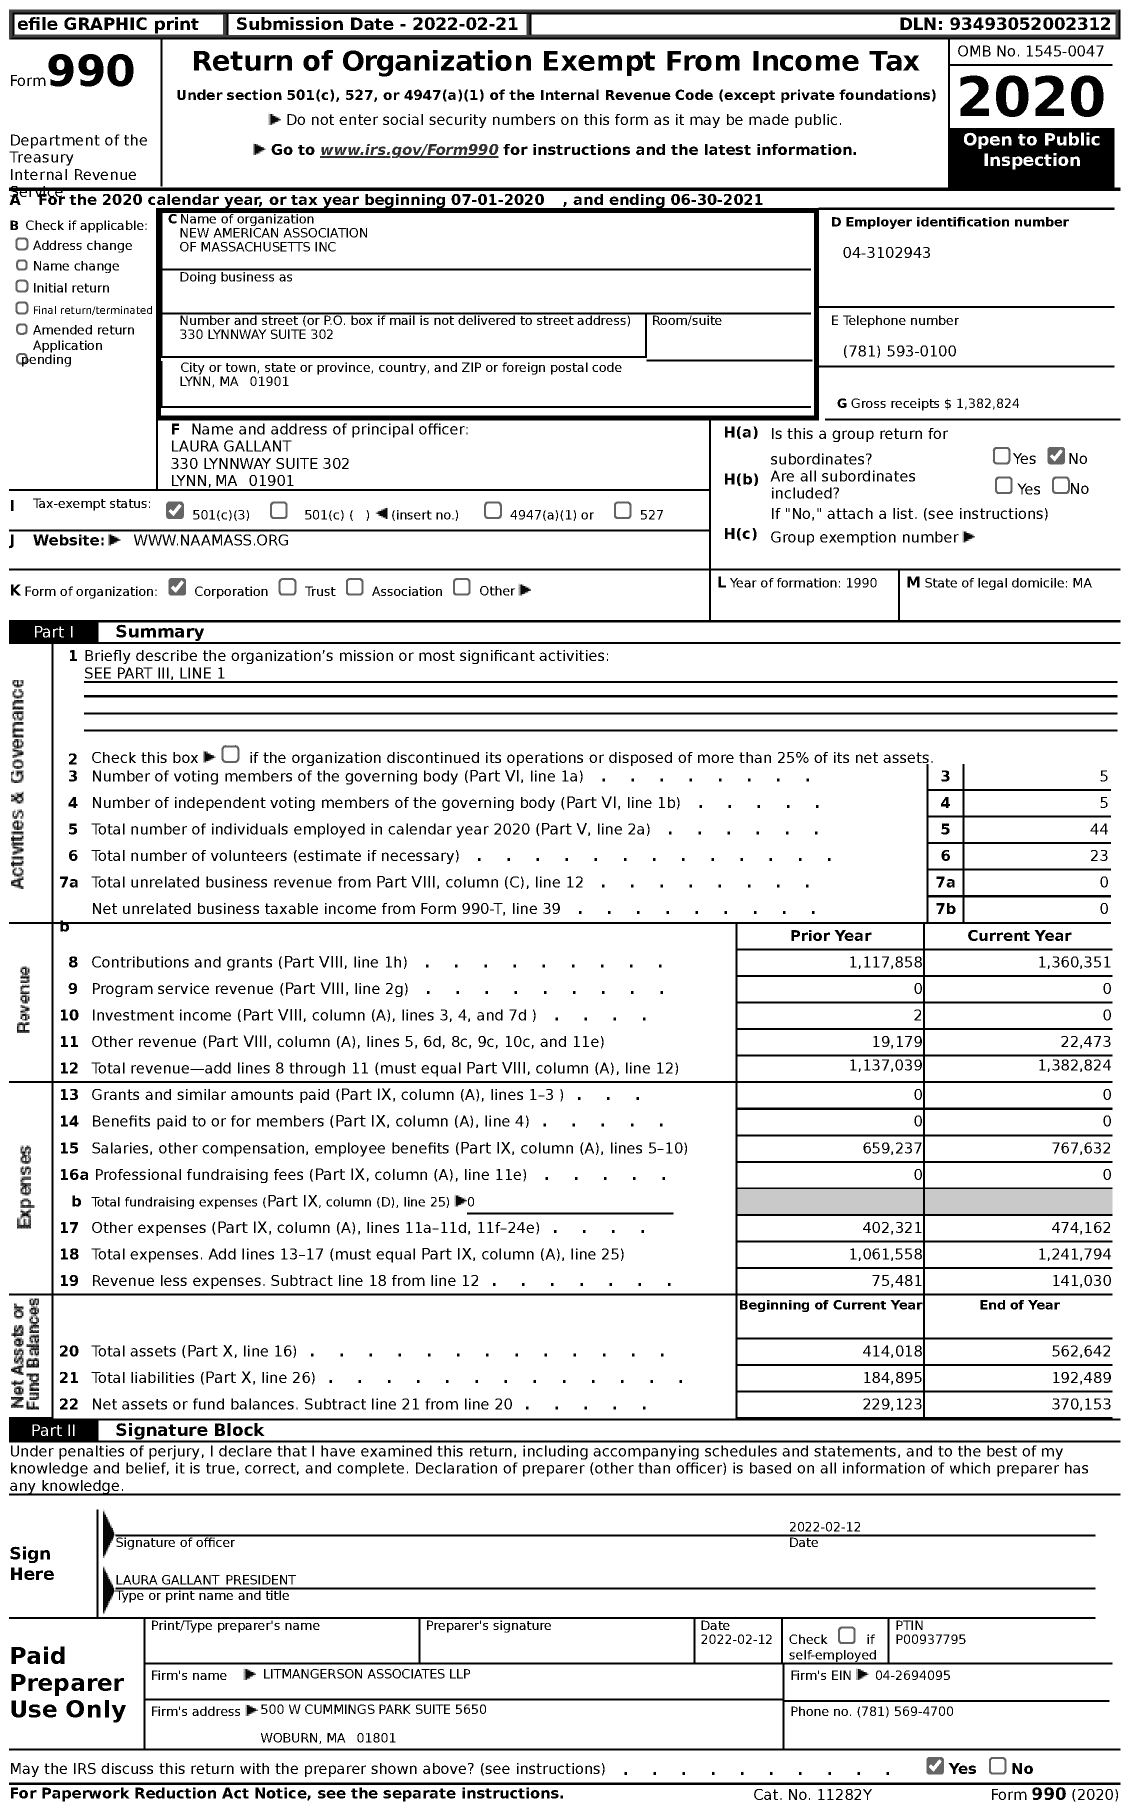 Image of first page of 2020 Form 990 for New American Association of Massachusetts